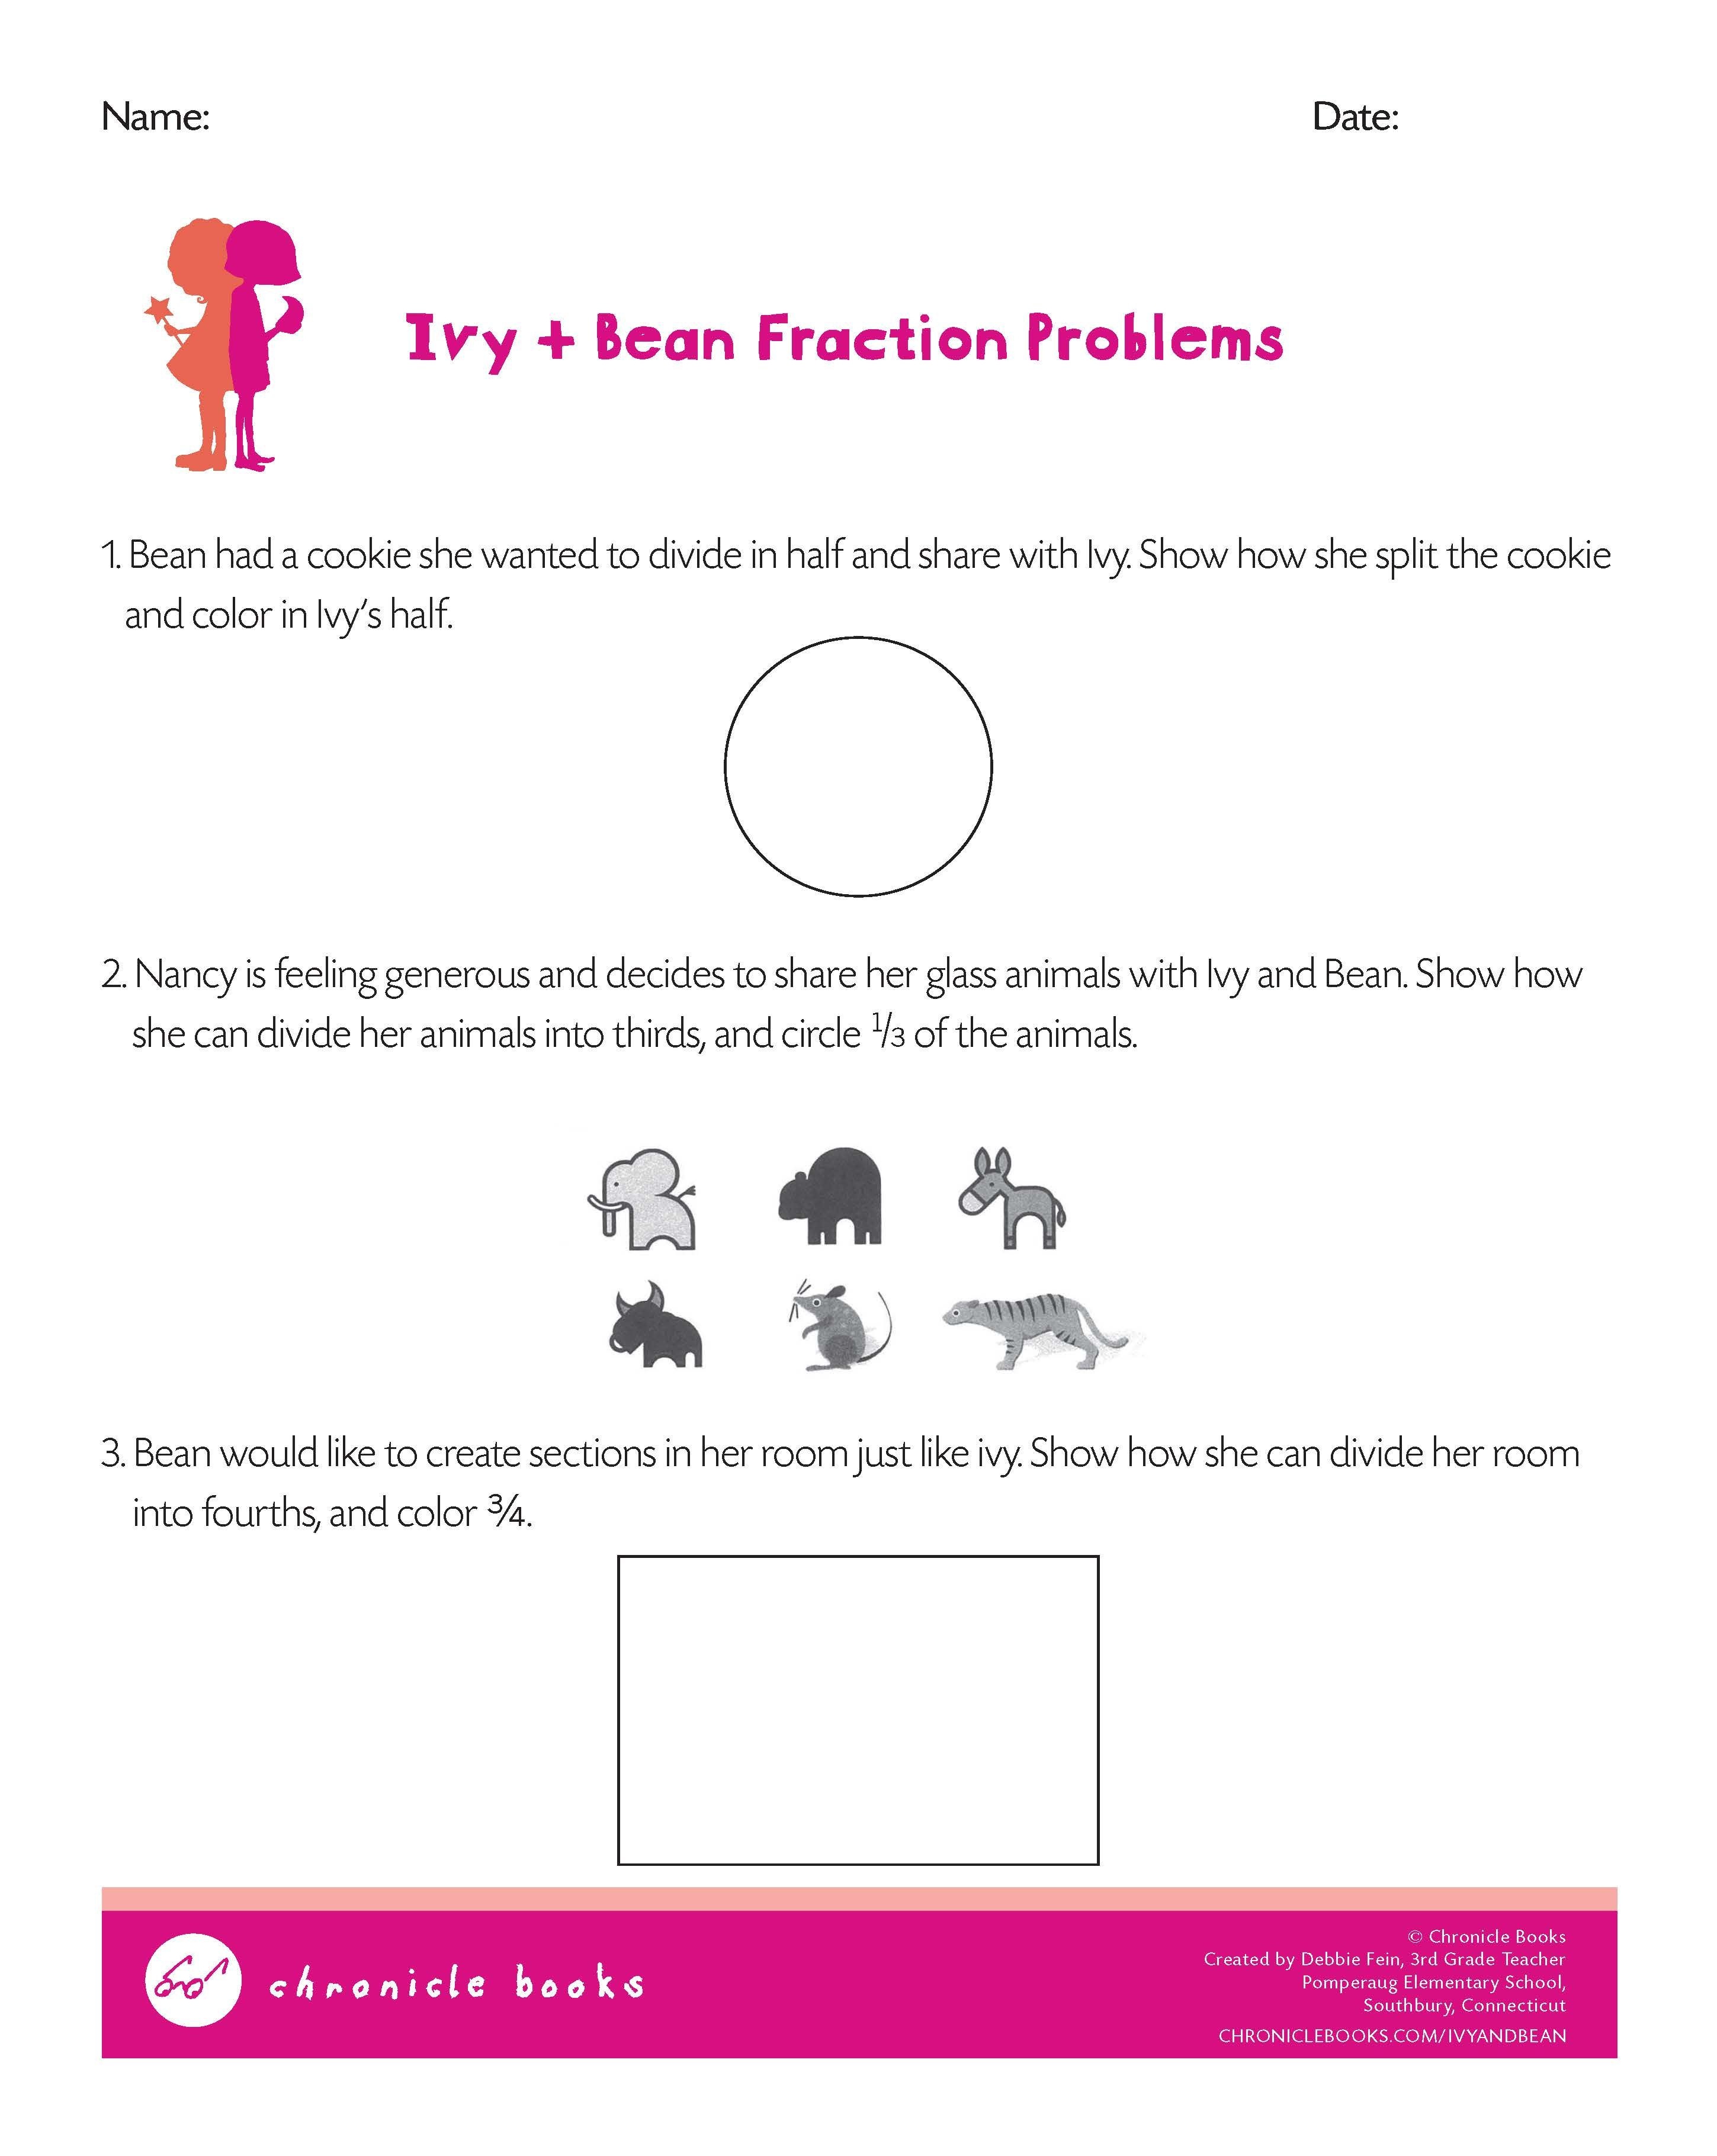 Ivy And Bean Fraction Problems Math Worksheet | For Ivy + Bean Fans - Indian In The Cupboard Free Printable Worksheets